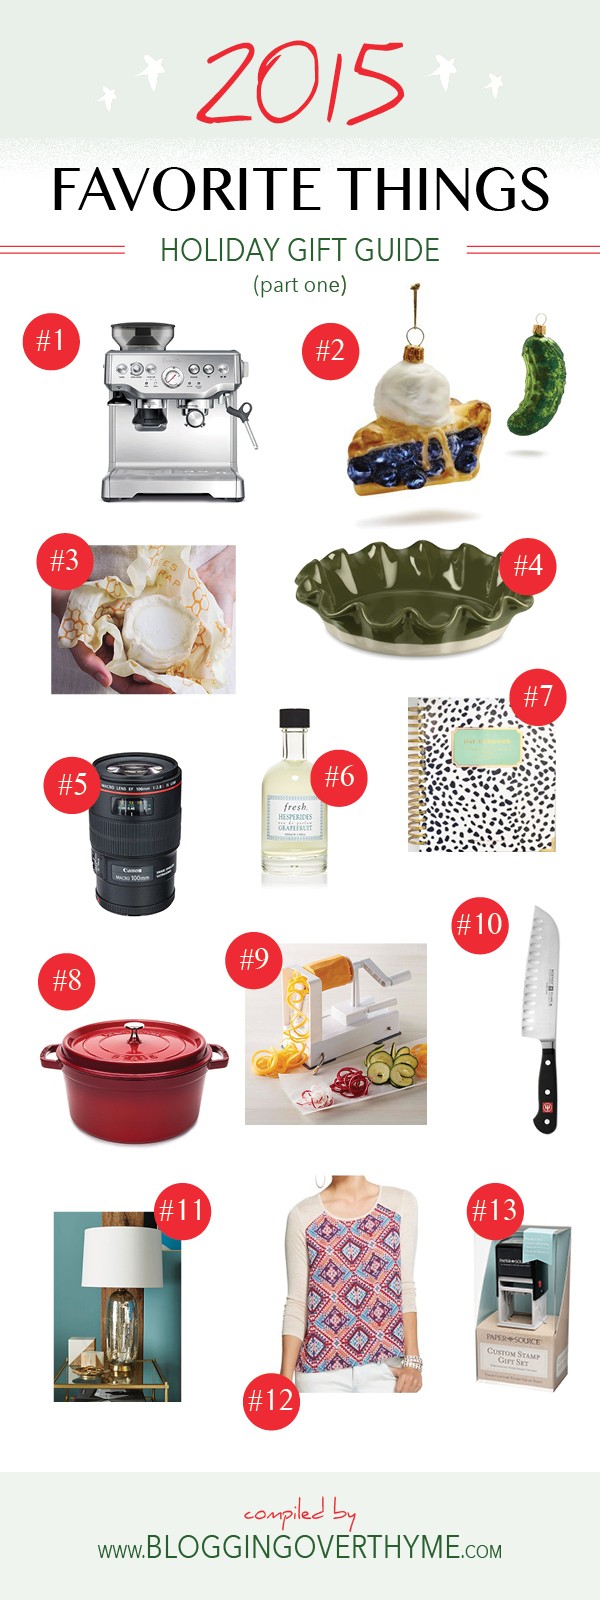 Favorite Things Holiday Gift Guide - A Beautiful Plate